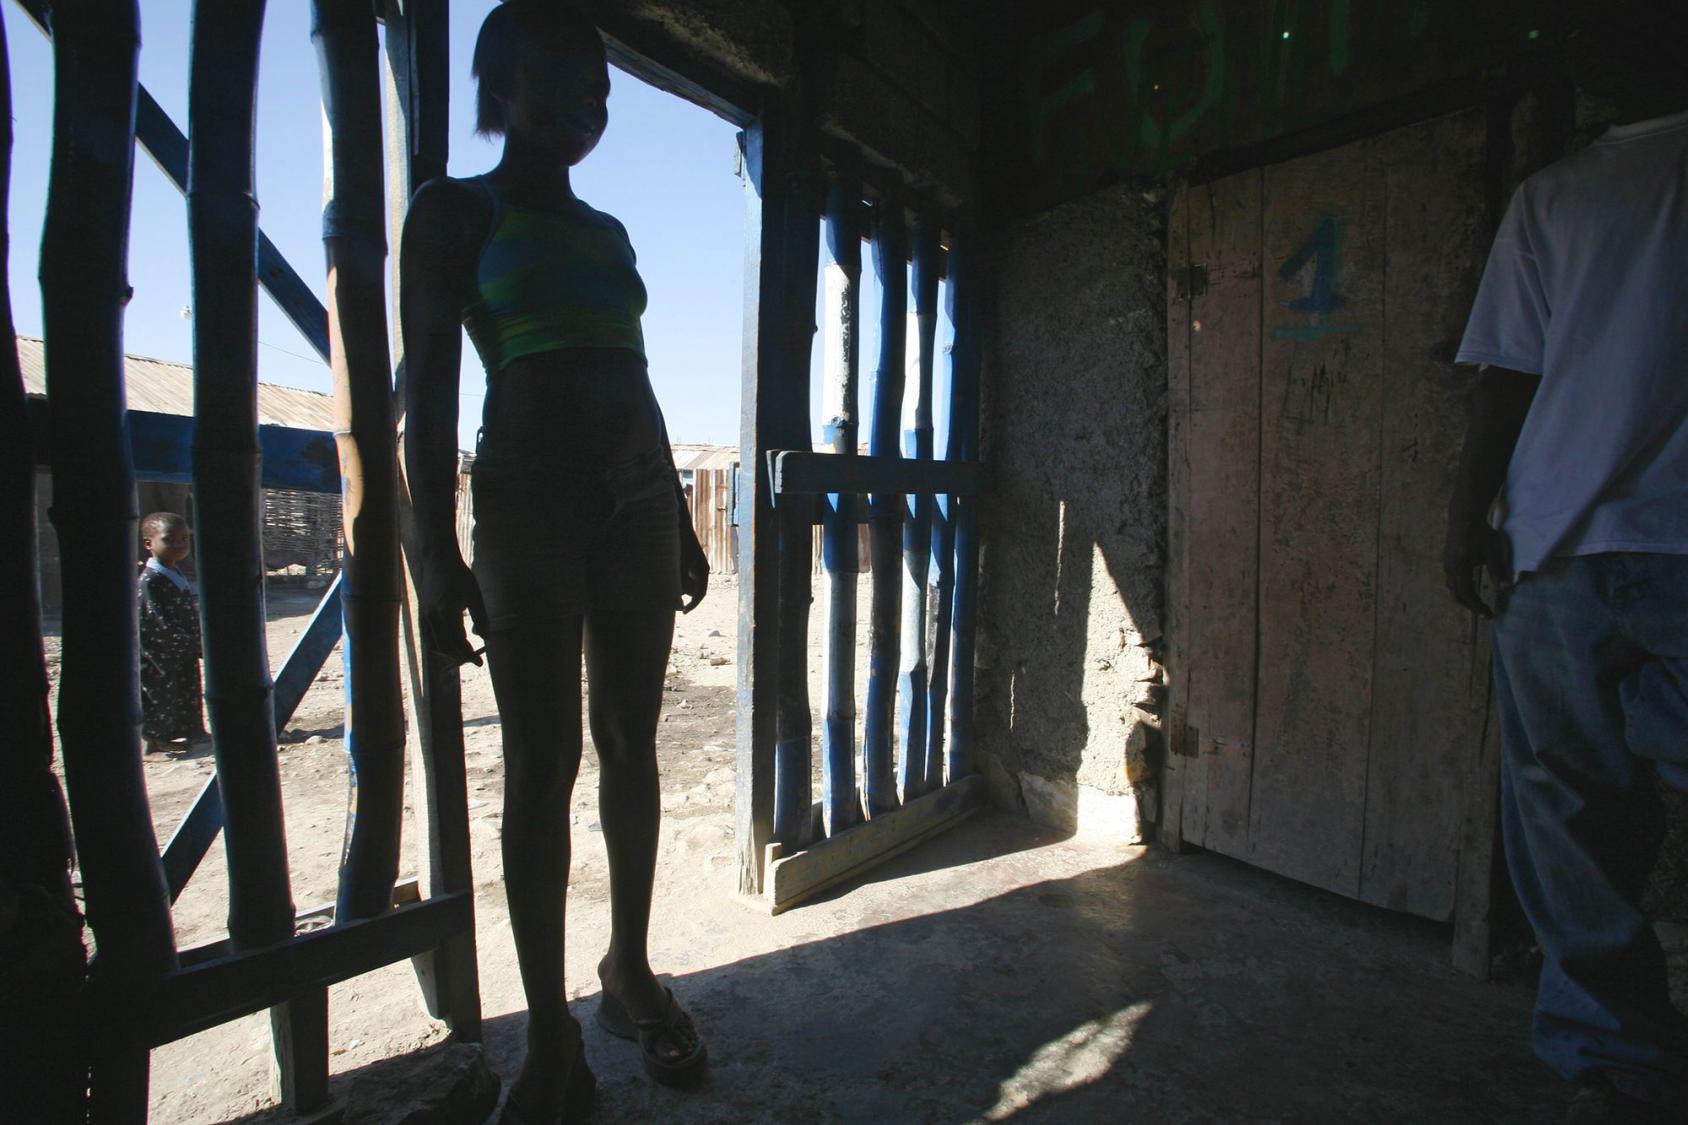 A young woman is photographed in backlight standing on the threshold of an entrance made of wooden bars.